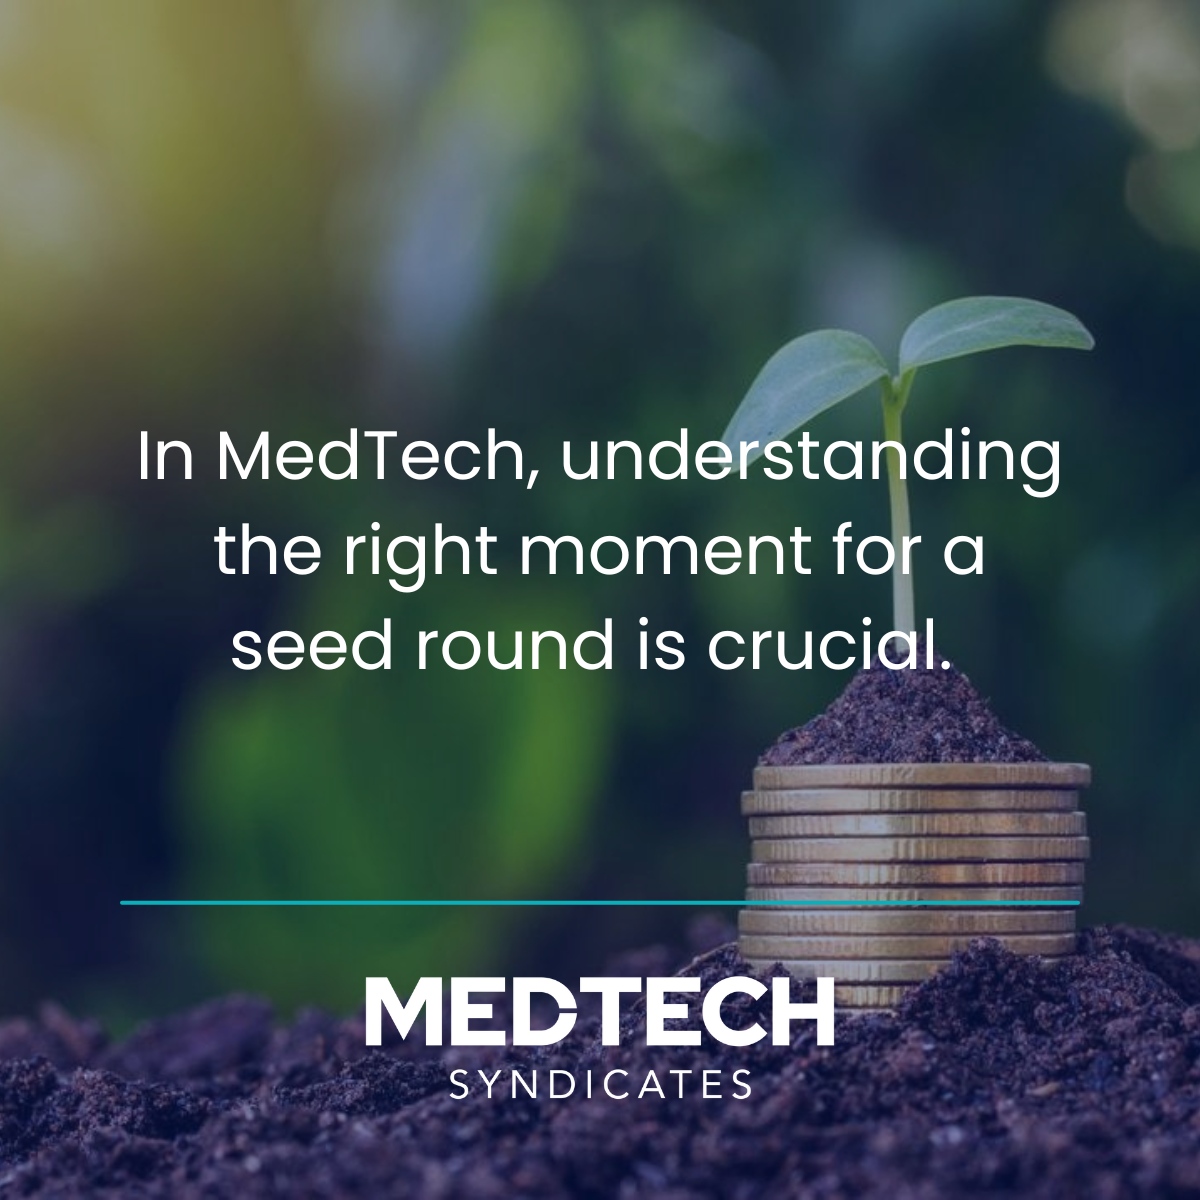 In MedTech, understanding the right moment for a seed round is crucial. We're interested in your experiences with seed funding. How have you navigated this crucial phase? #MedTechSyndicates #SeedFundingJourney #MedTech #SeedFunding